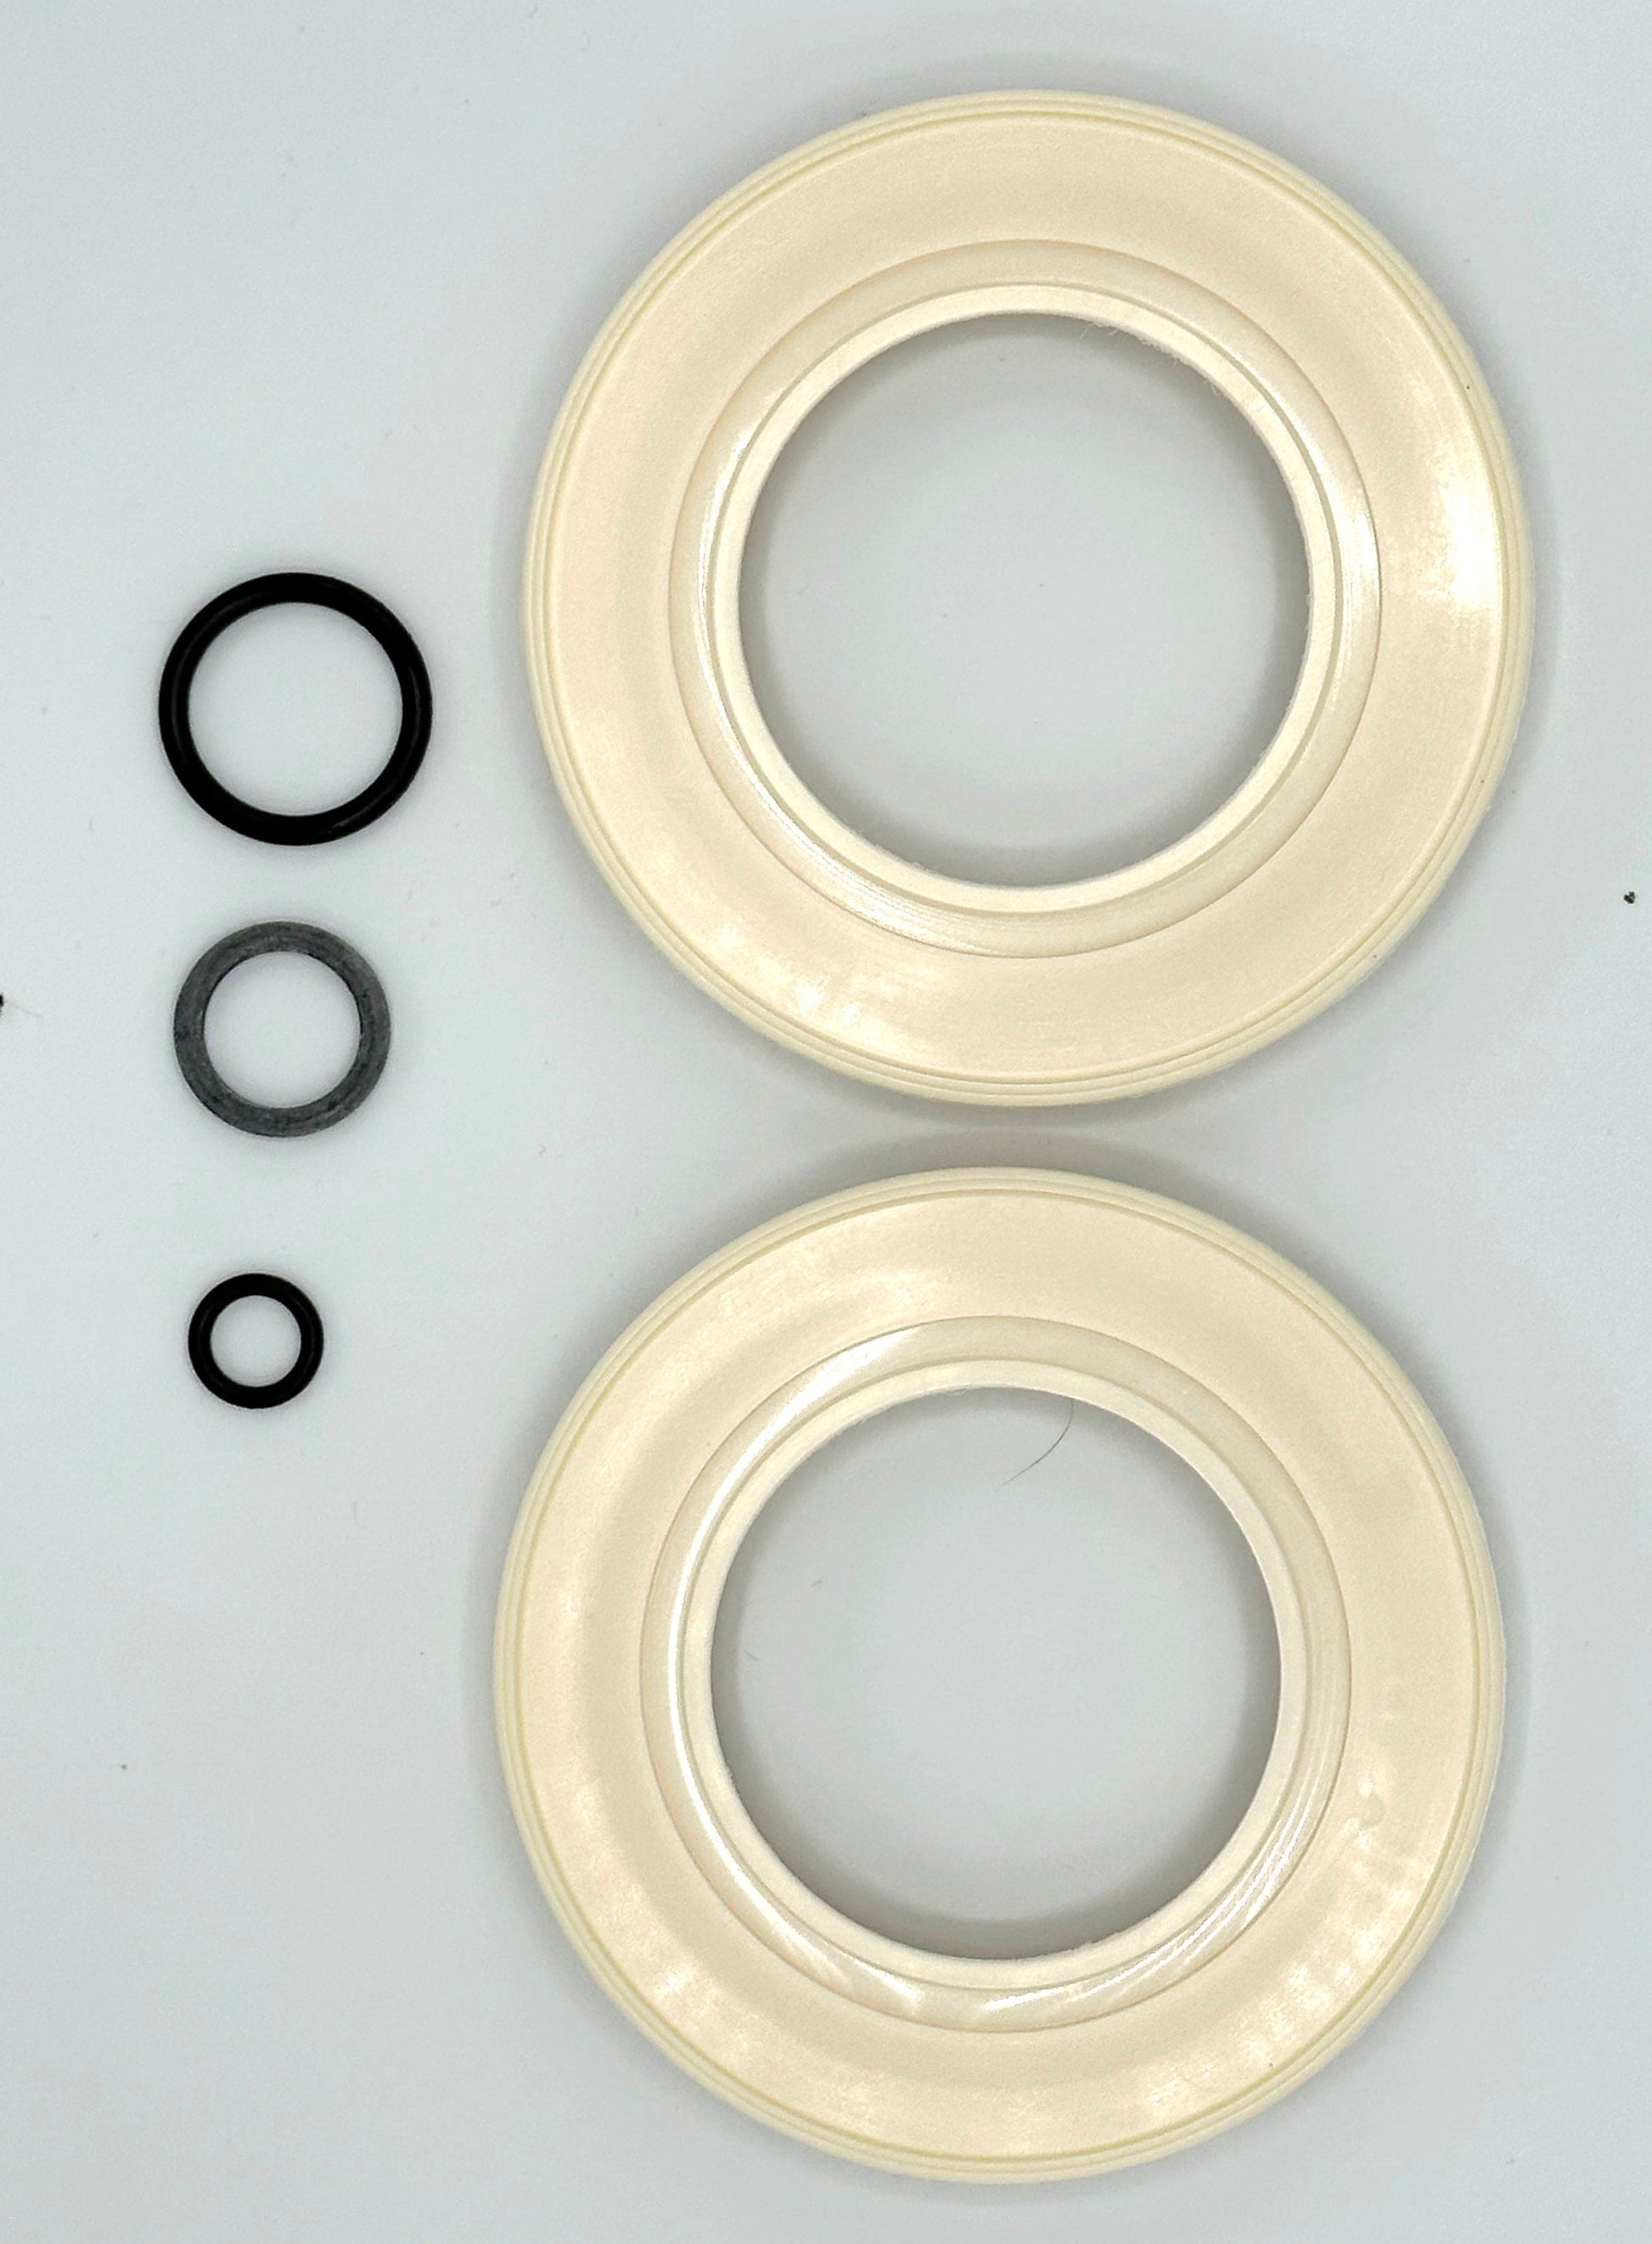 Akron Brass Valve Repair Kit without Ball